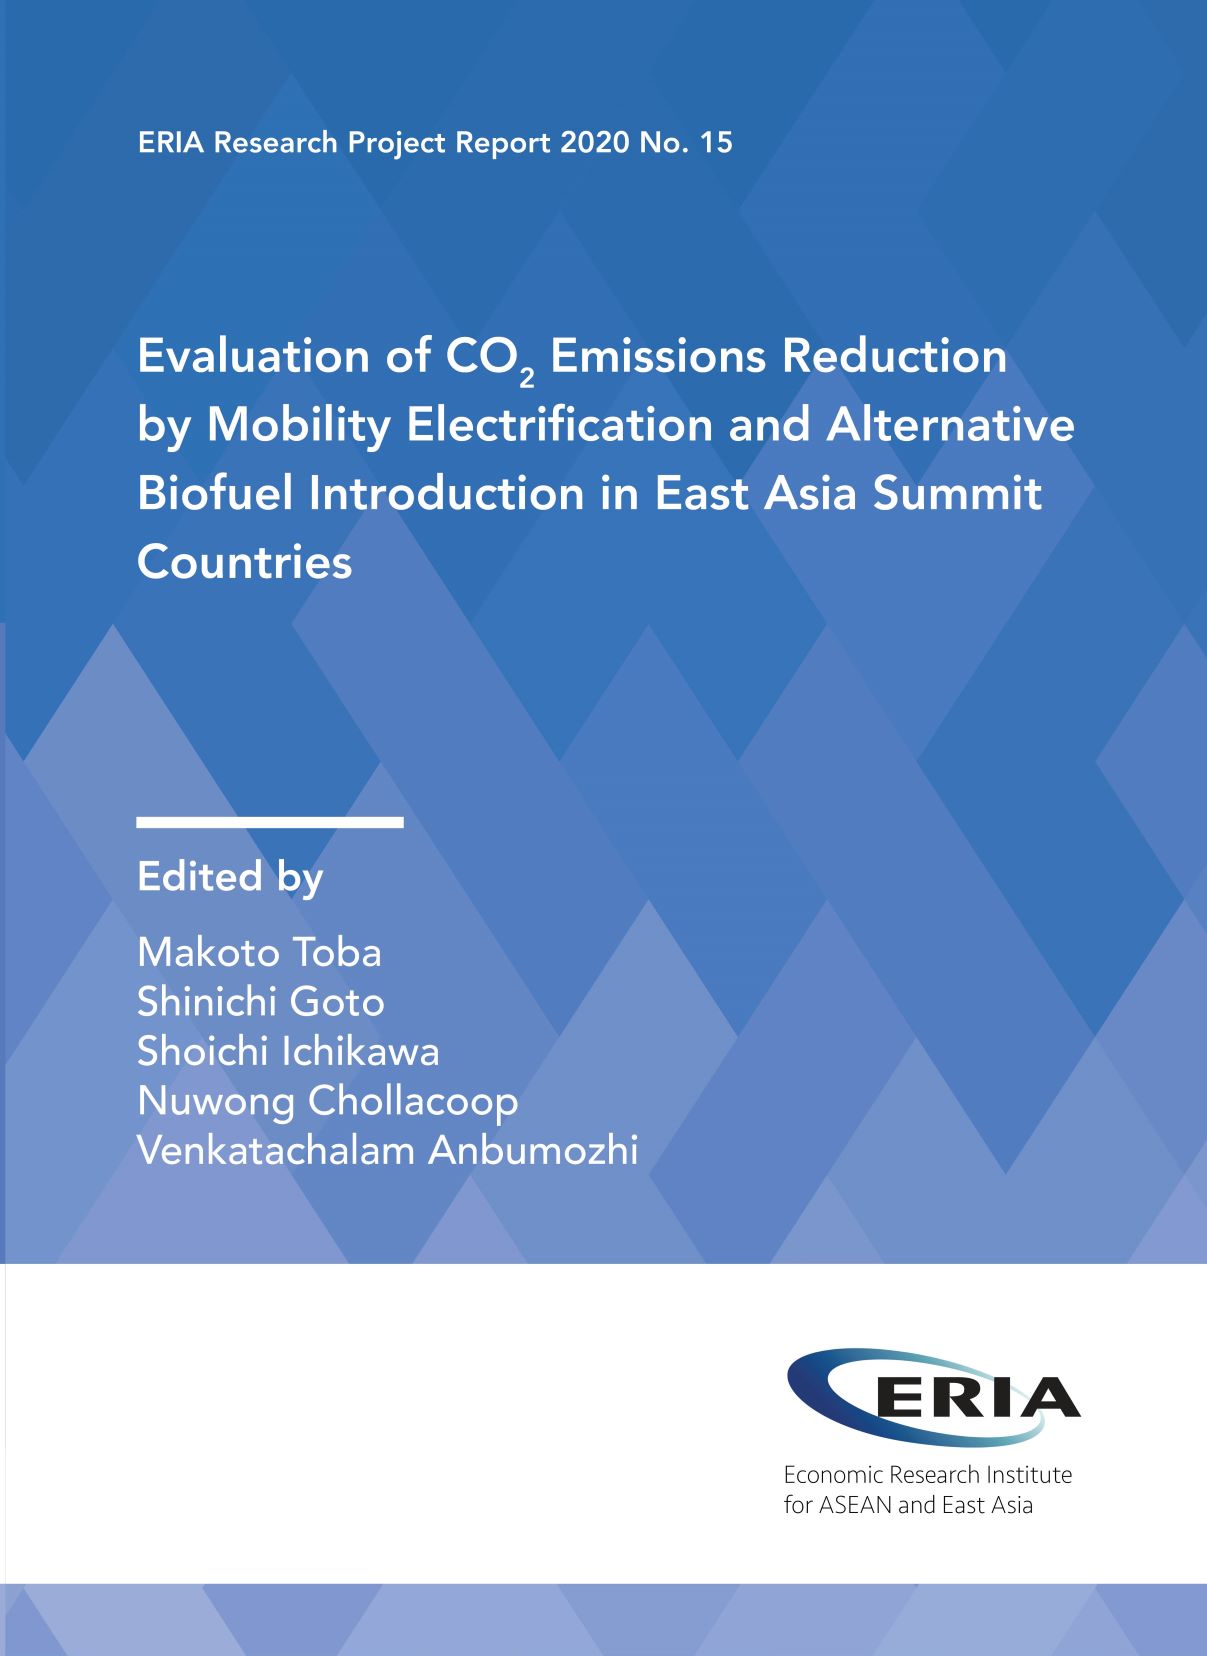 Reducing Emissions with Electrification